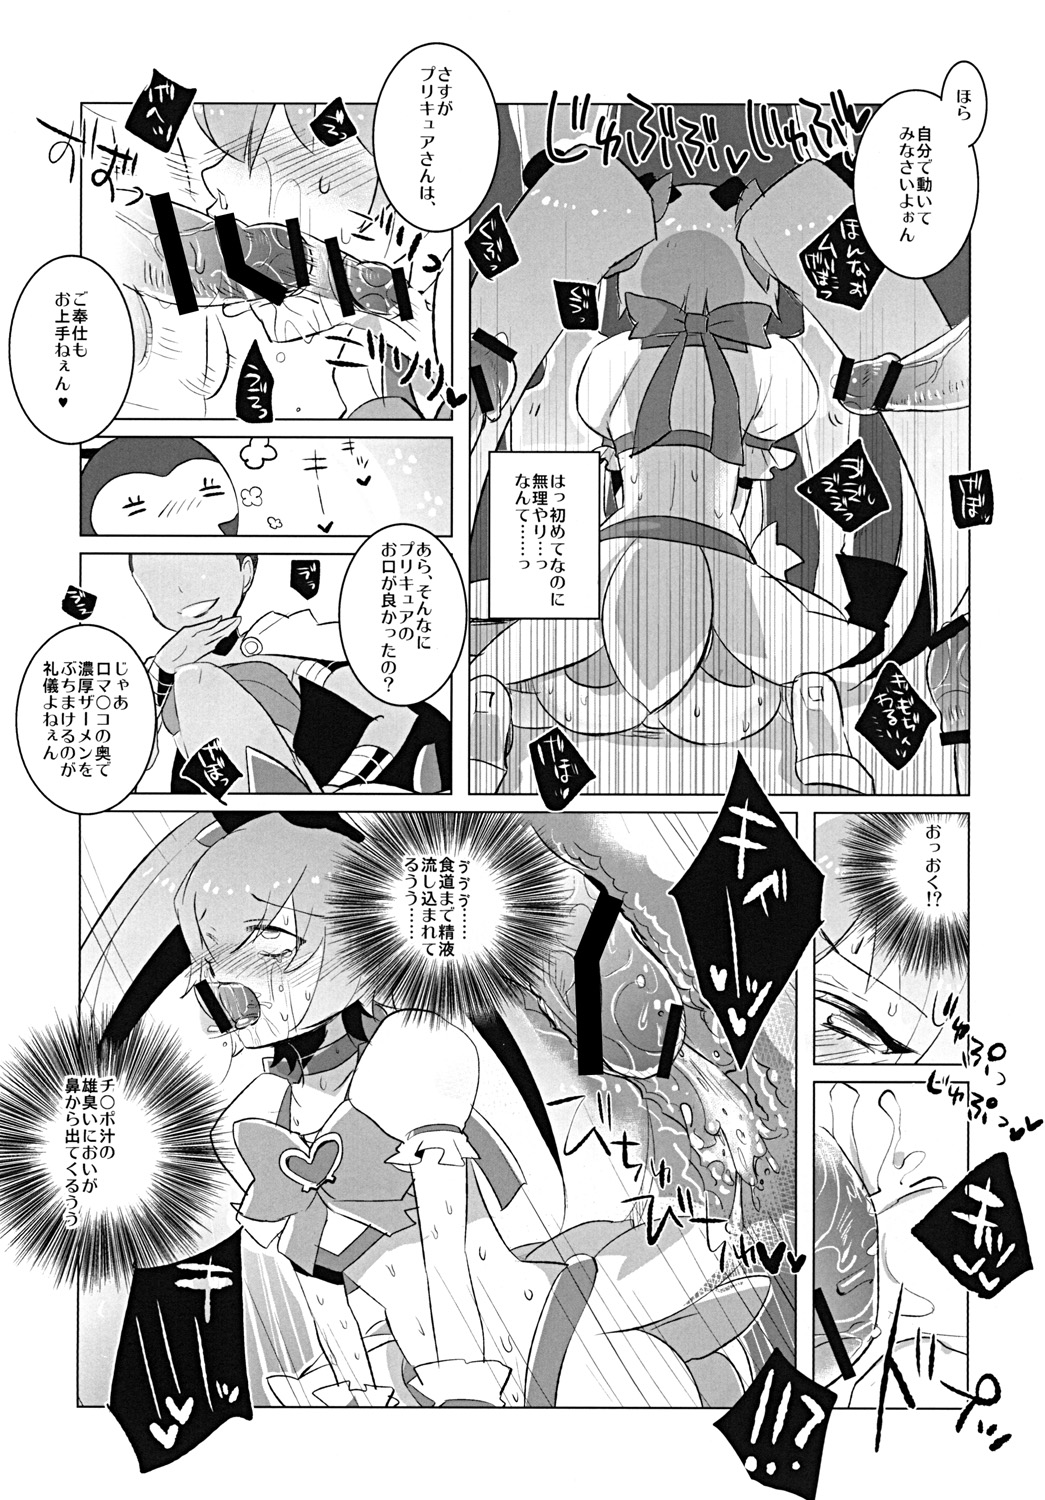 [clear glass (menimo)] Kite Mite Sawatte ☆ (Heart Catch Precure!) page 9 full